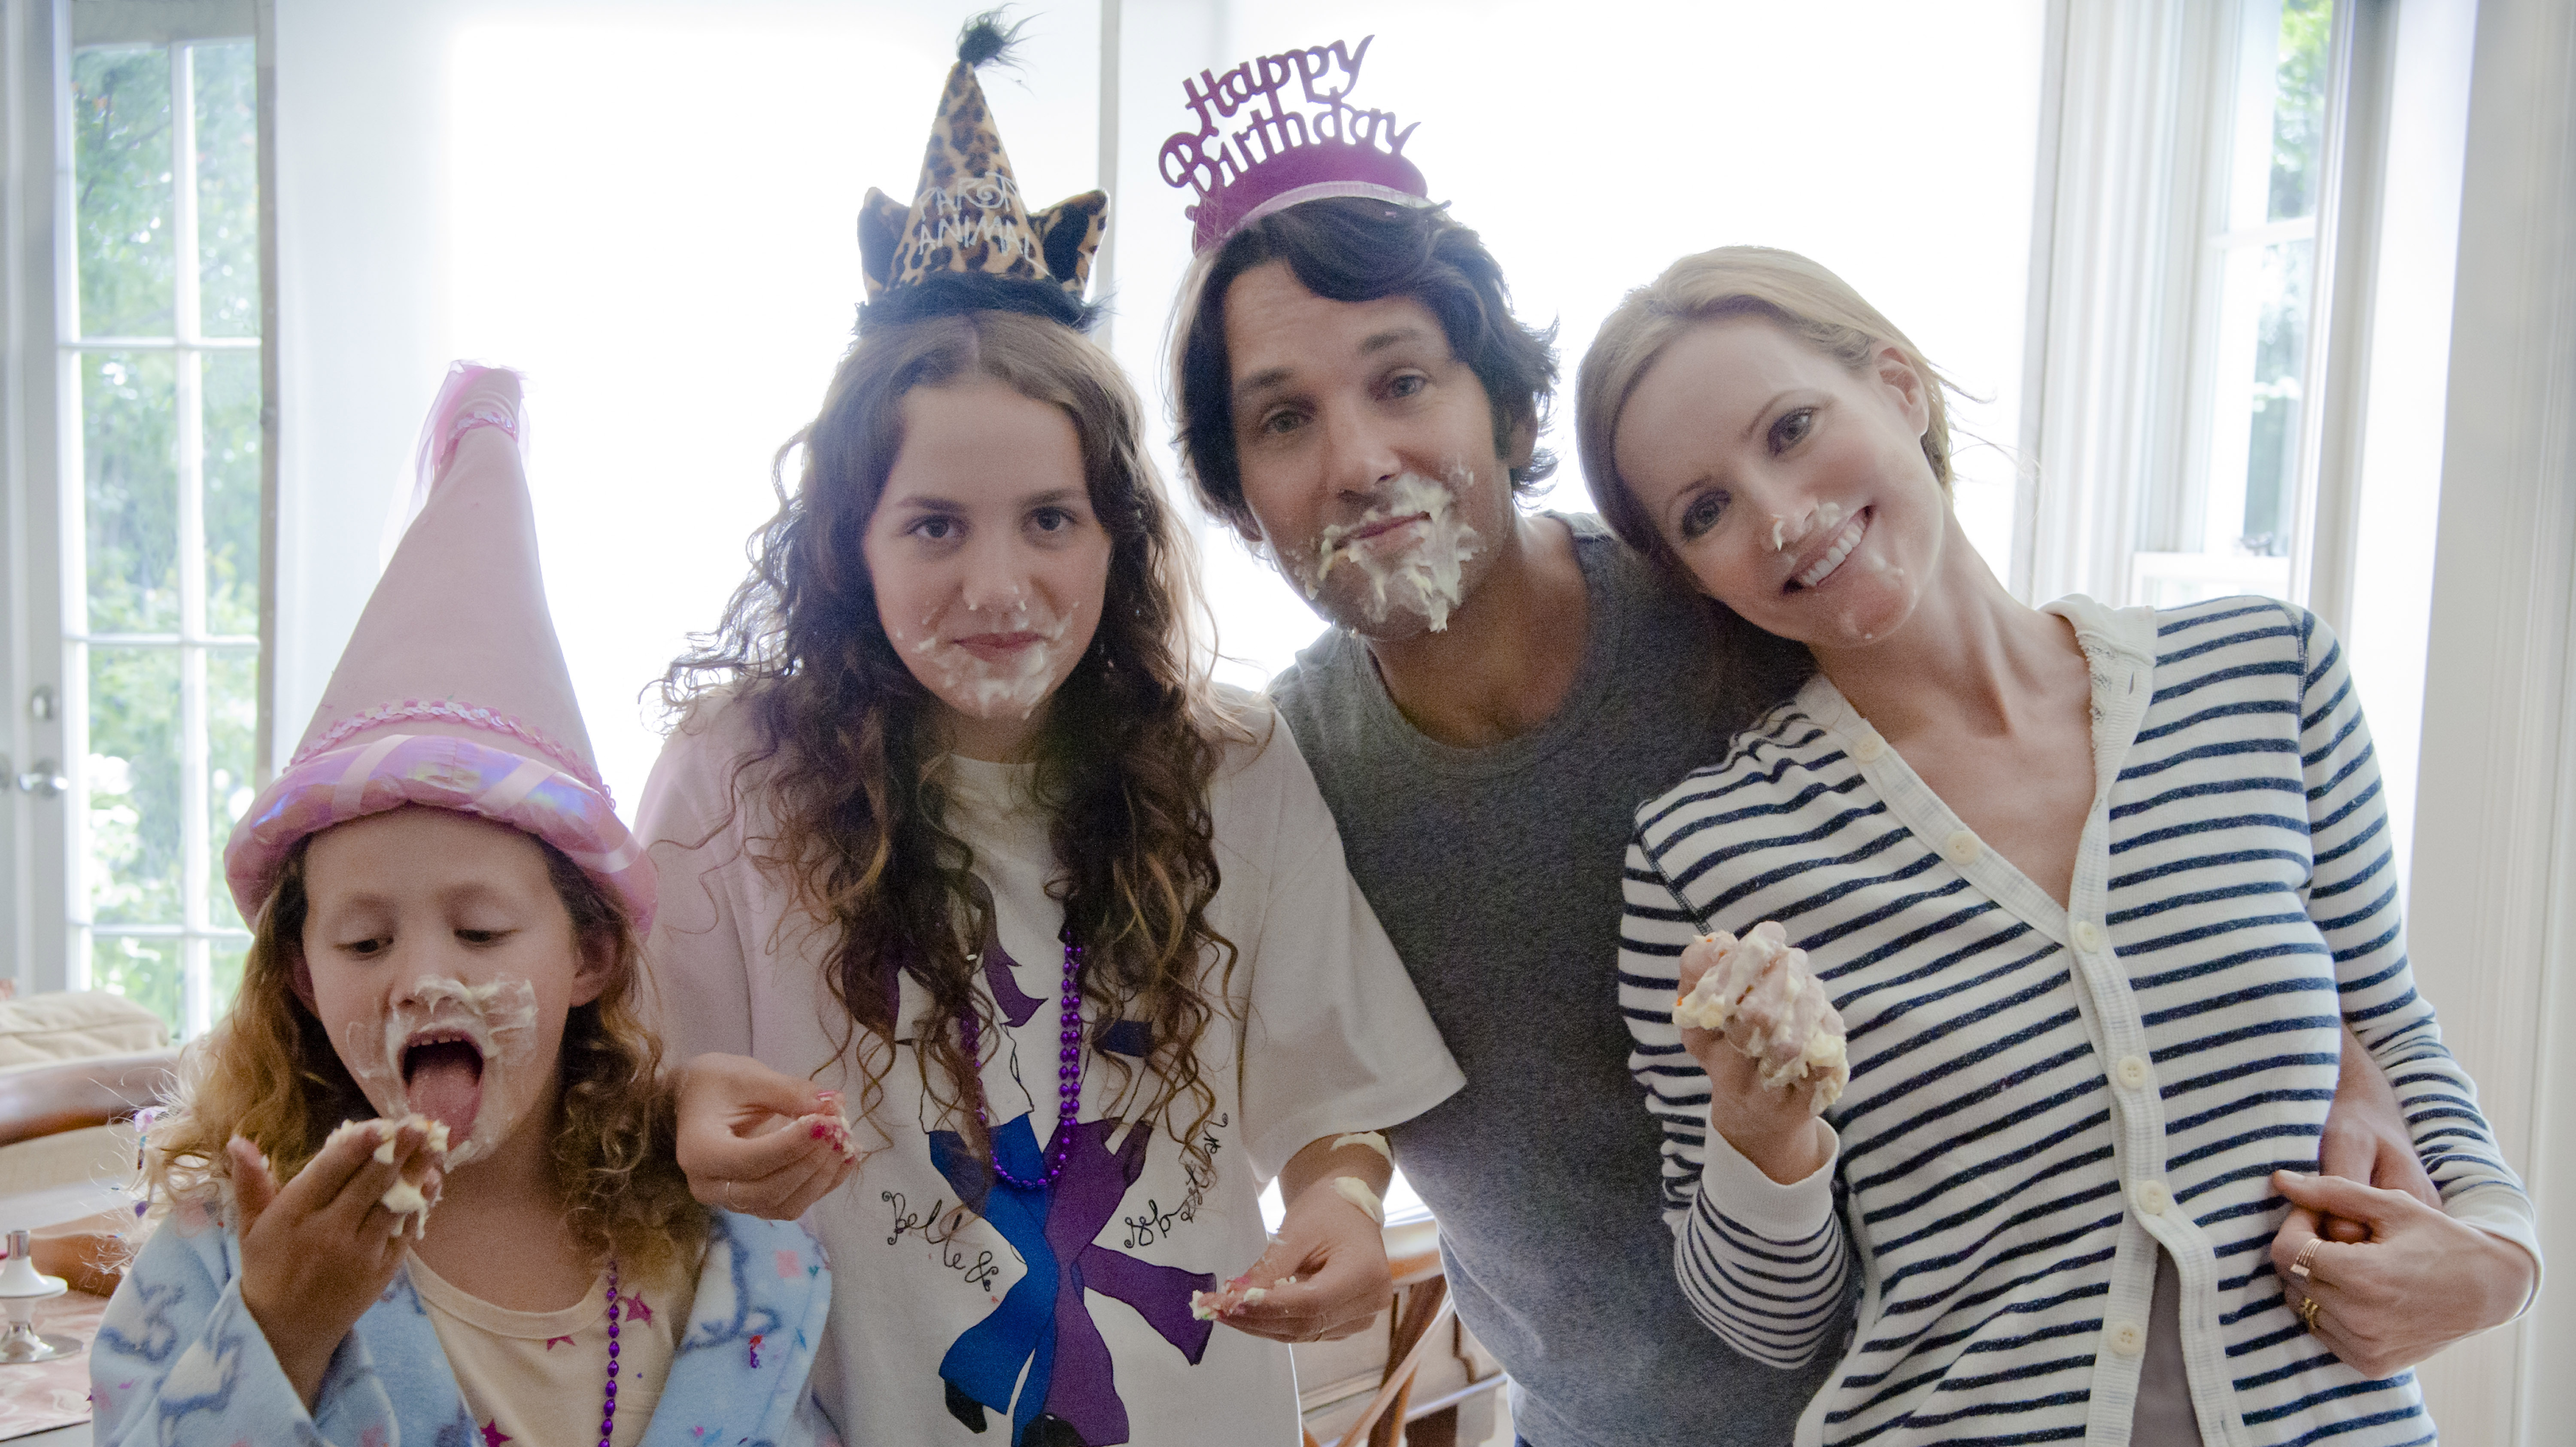 The cast of This is 40 is posing for a picture with cake on their faces.